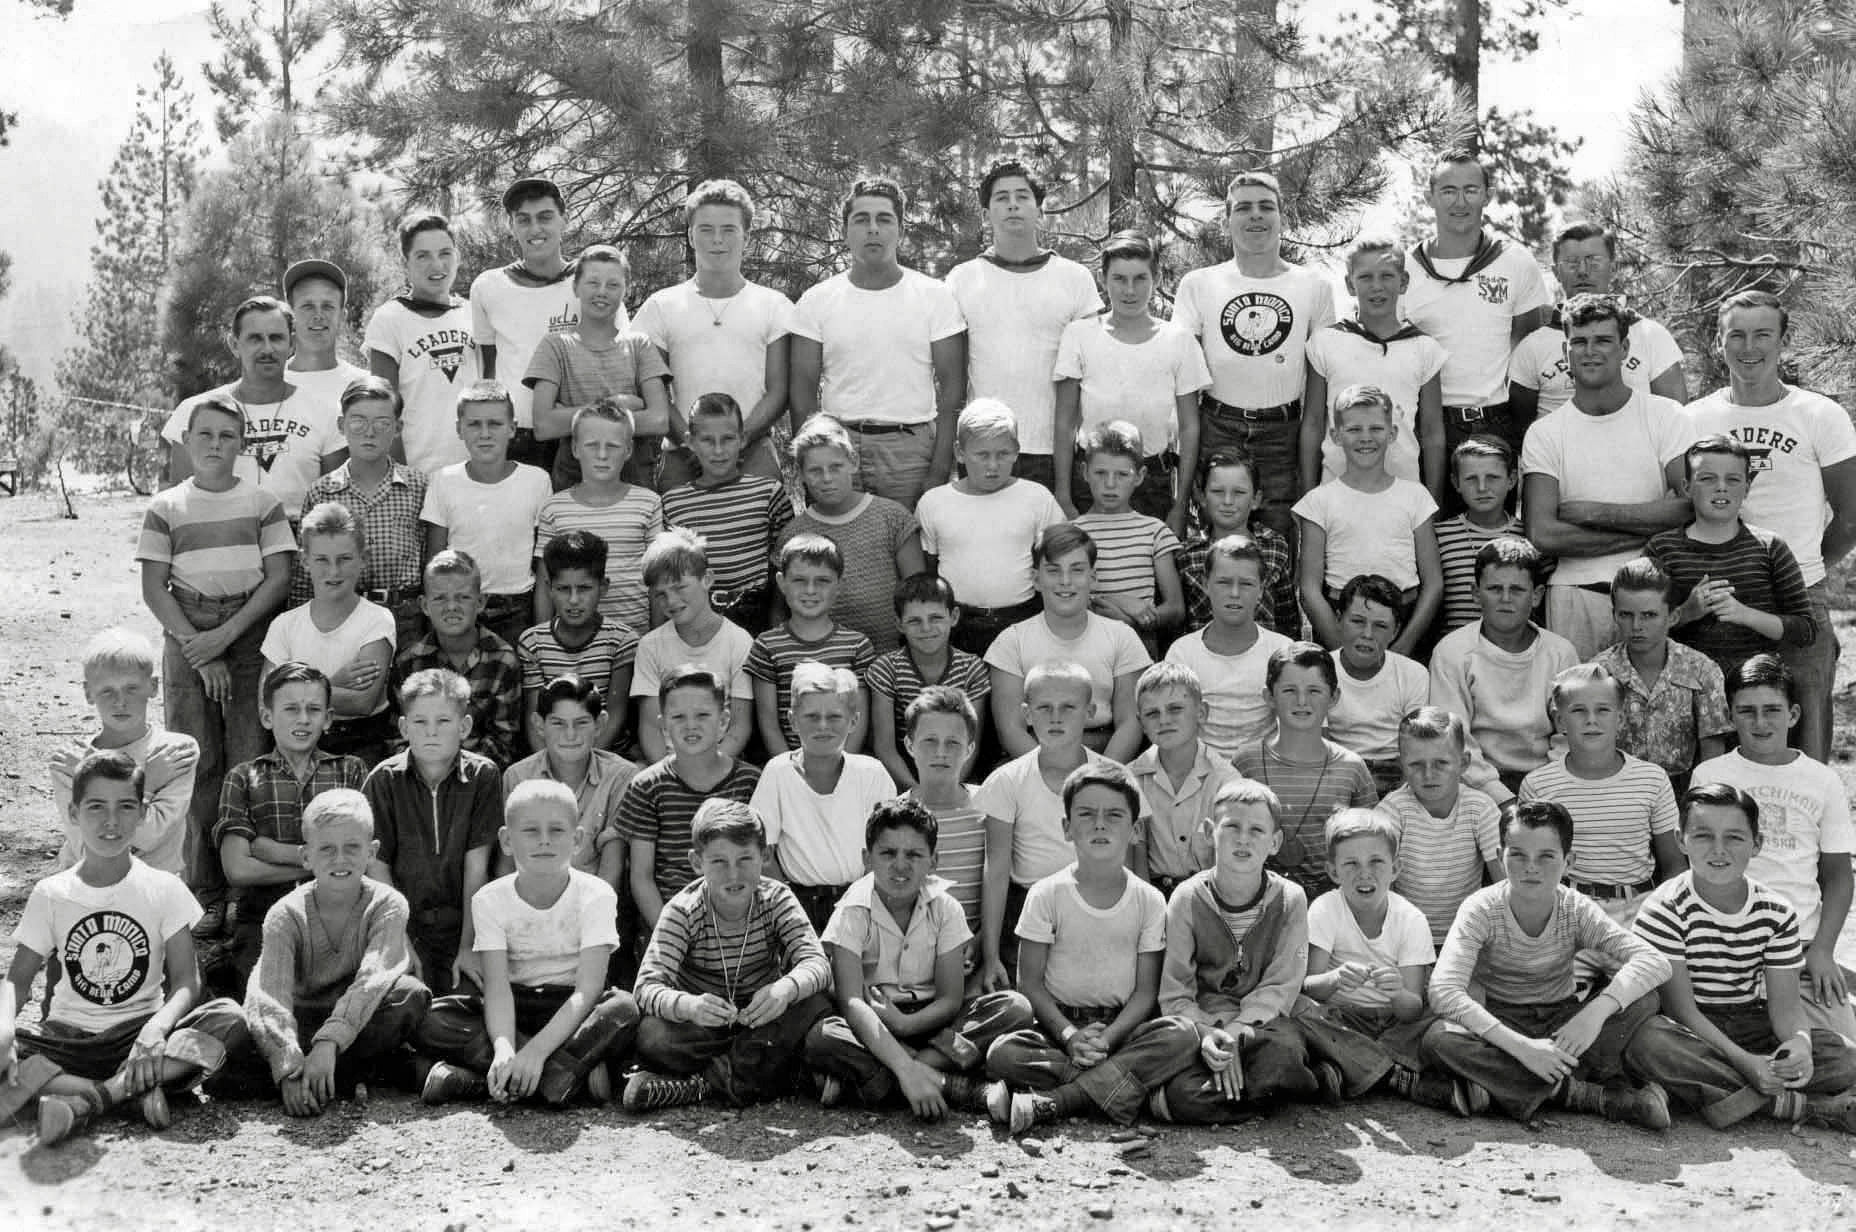 Back in 1946 at Big Bear Lake, California. I was still in high school and in the summer break I spent two weeks at camp with the young boys as a cabin leader. This might be something missing these days. I'm in the back row fourth from the left. View full size.